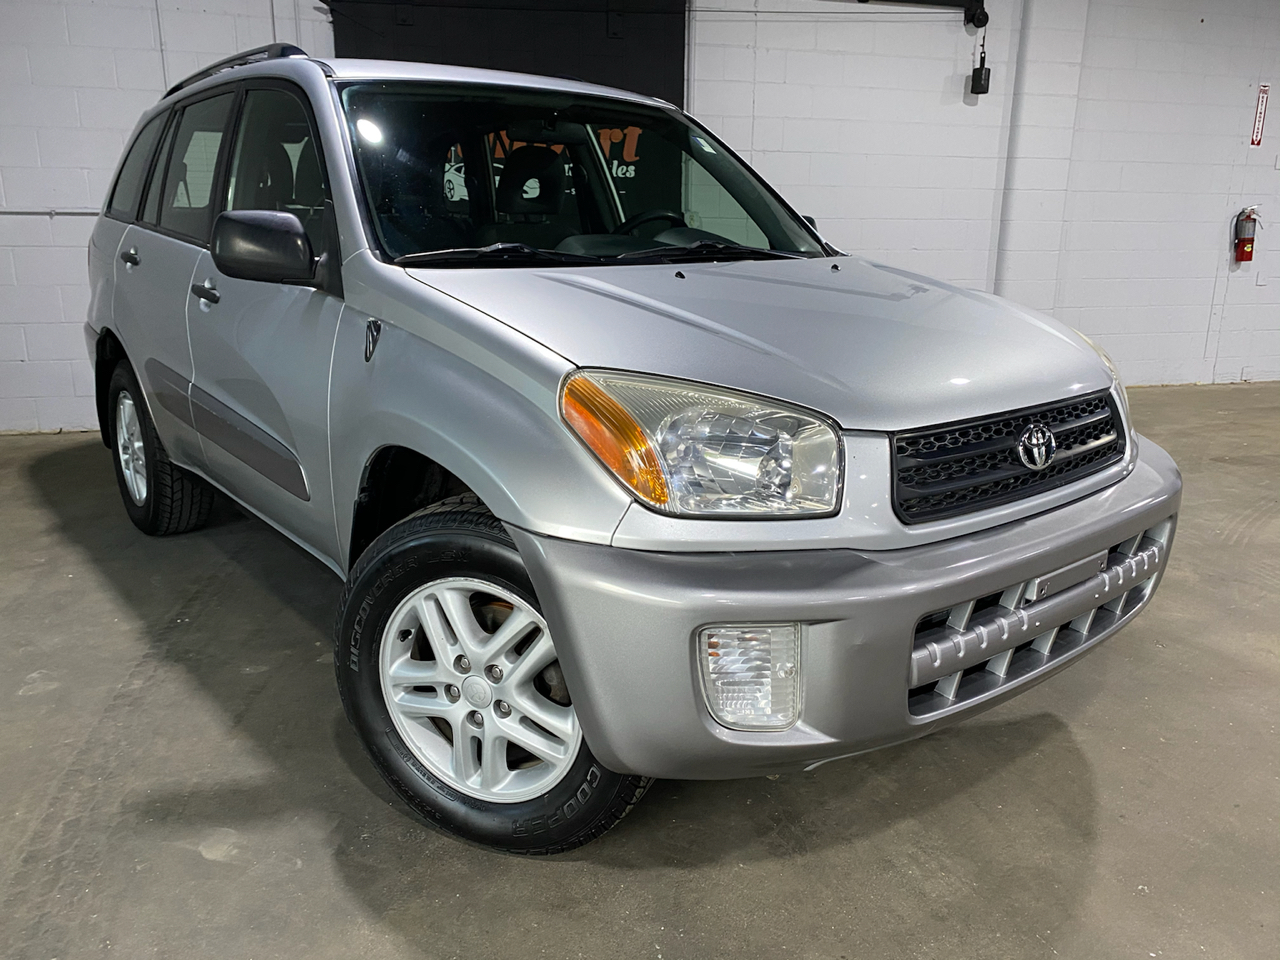 Used 2002 Toyota RAV4 2WD for Sale in Minneapolis MN 55416 Import Auto